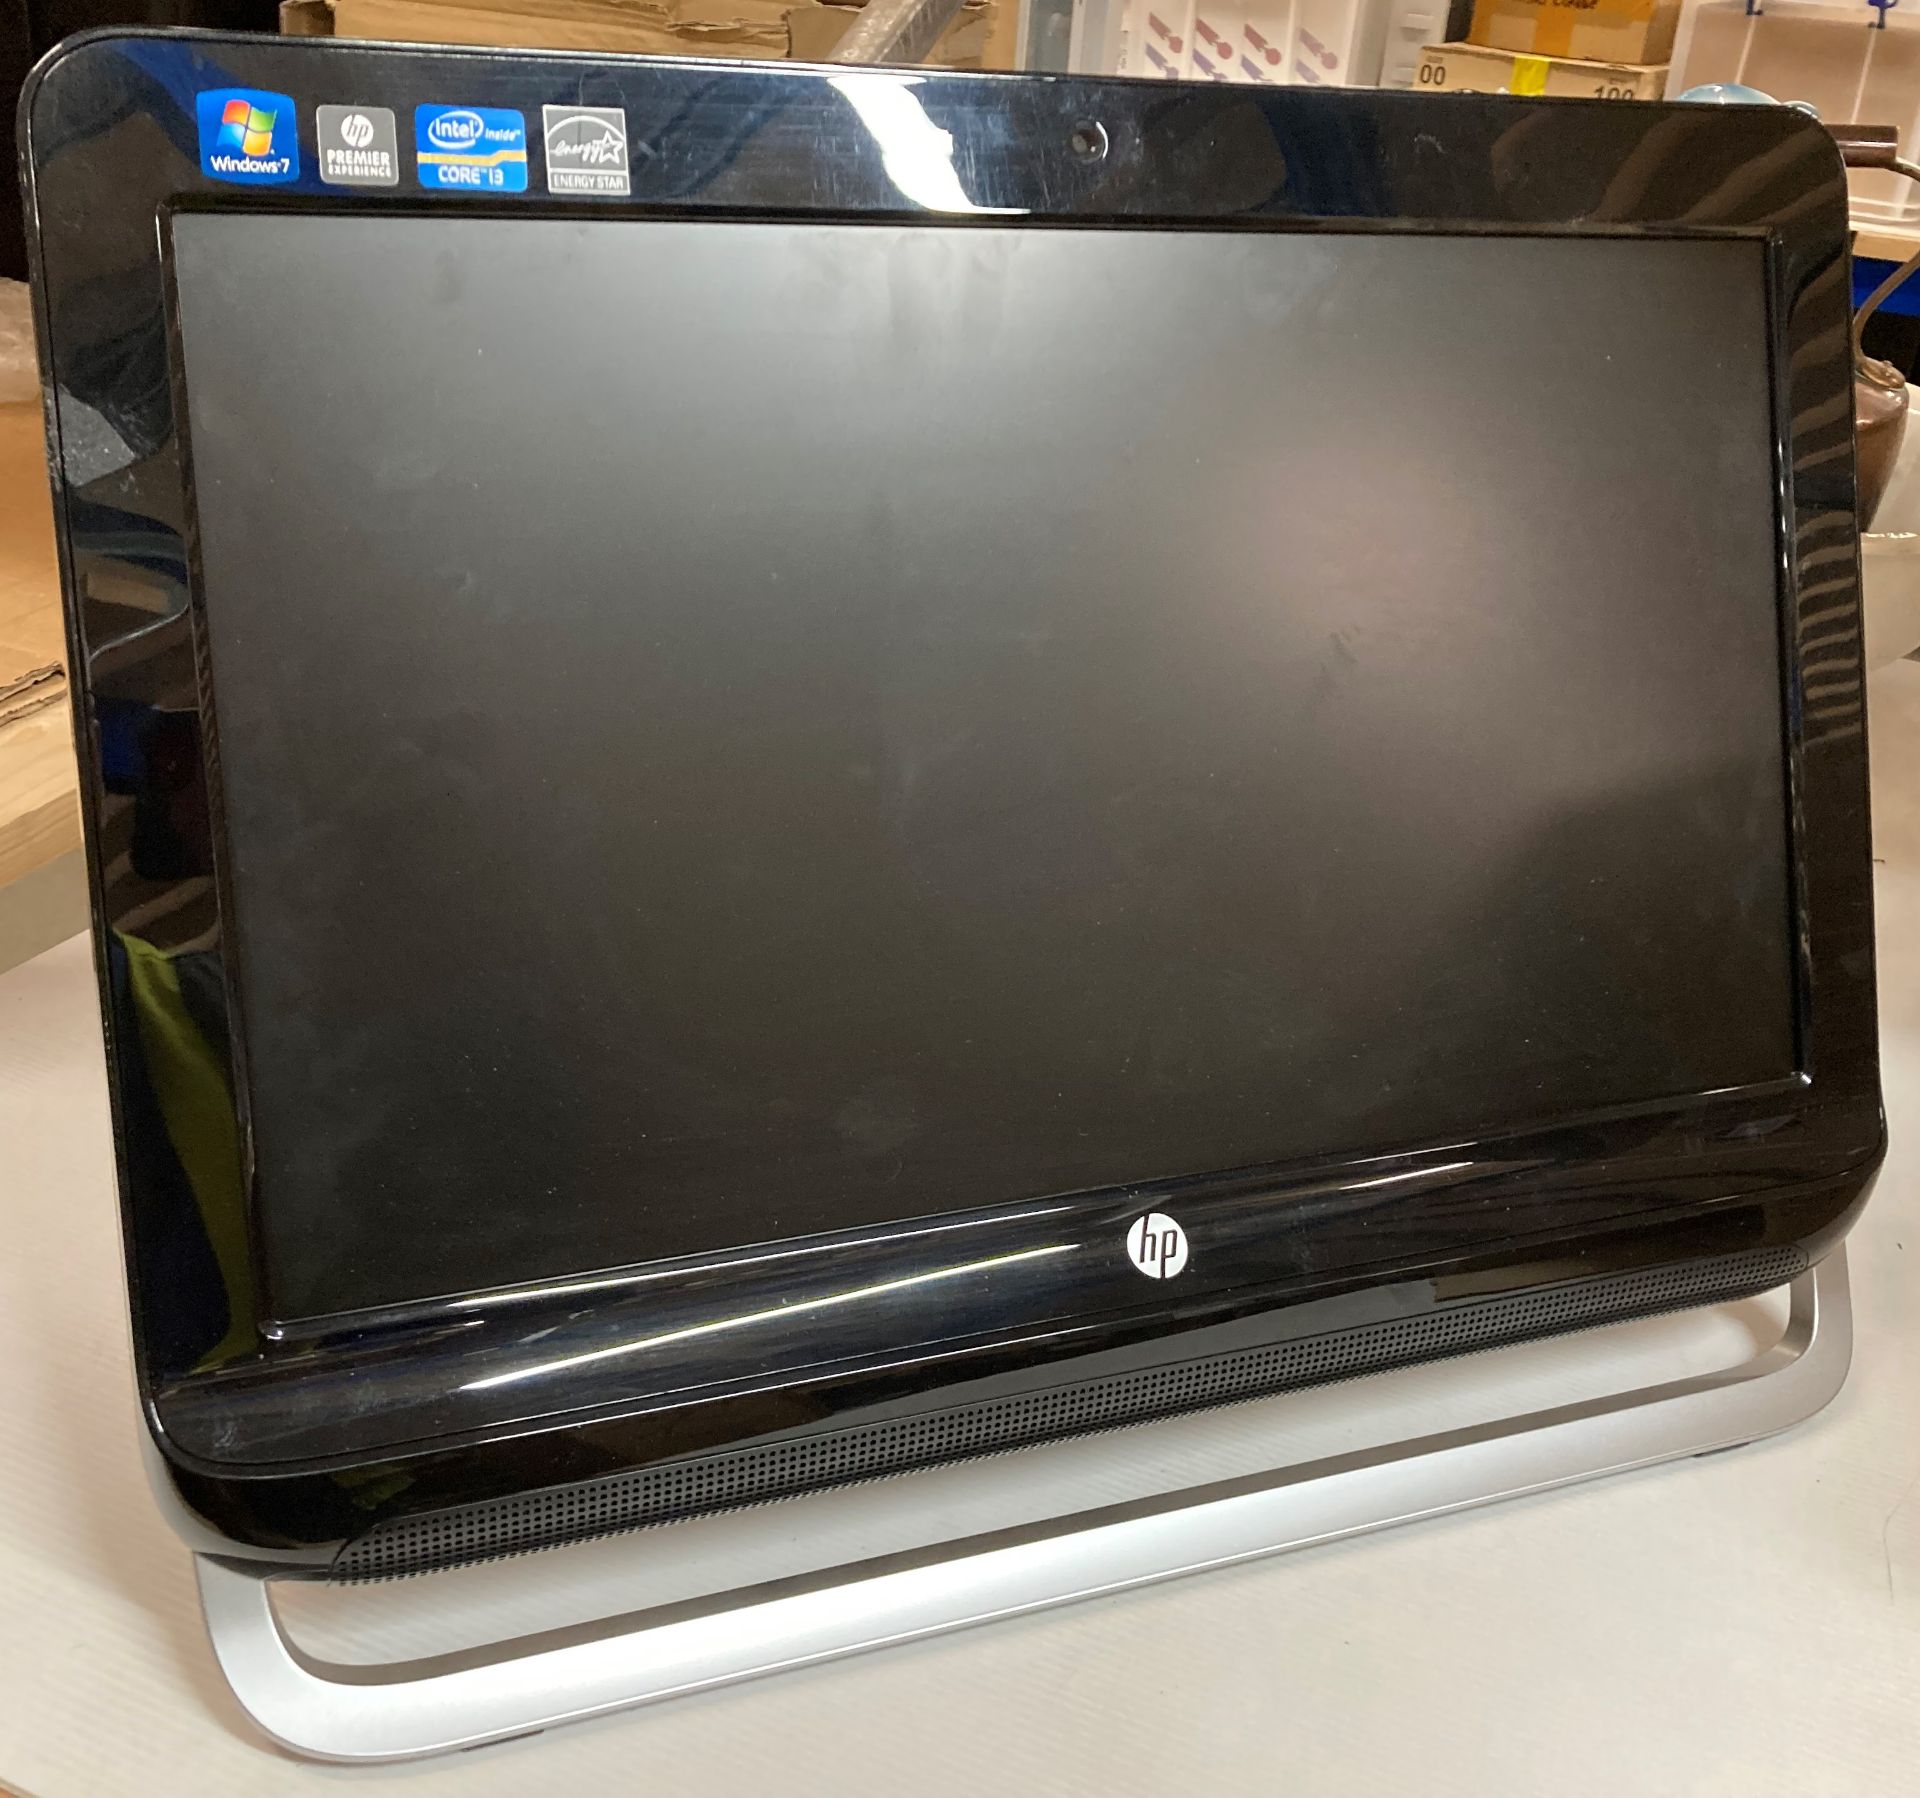 HP Omni 120AIO all-in-one monitor (no test, no power lead,